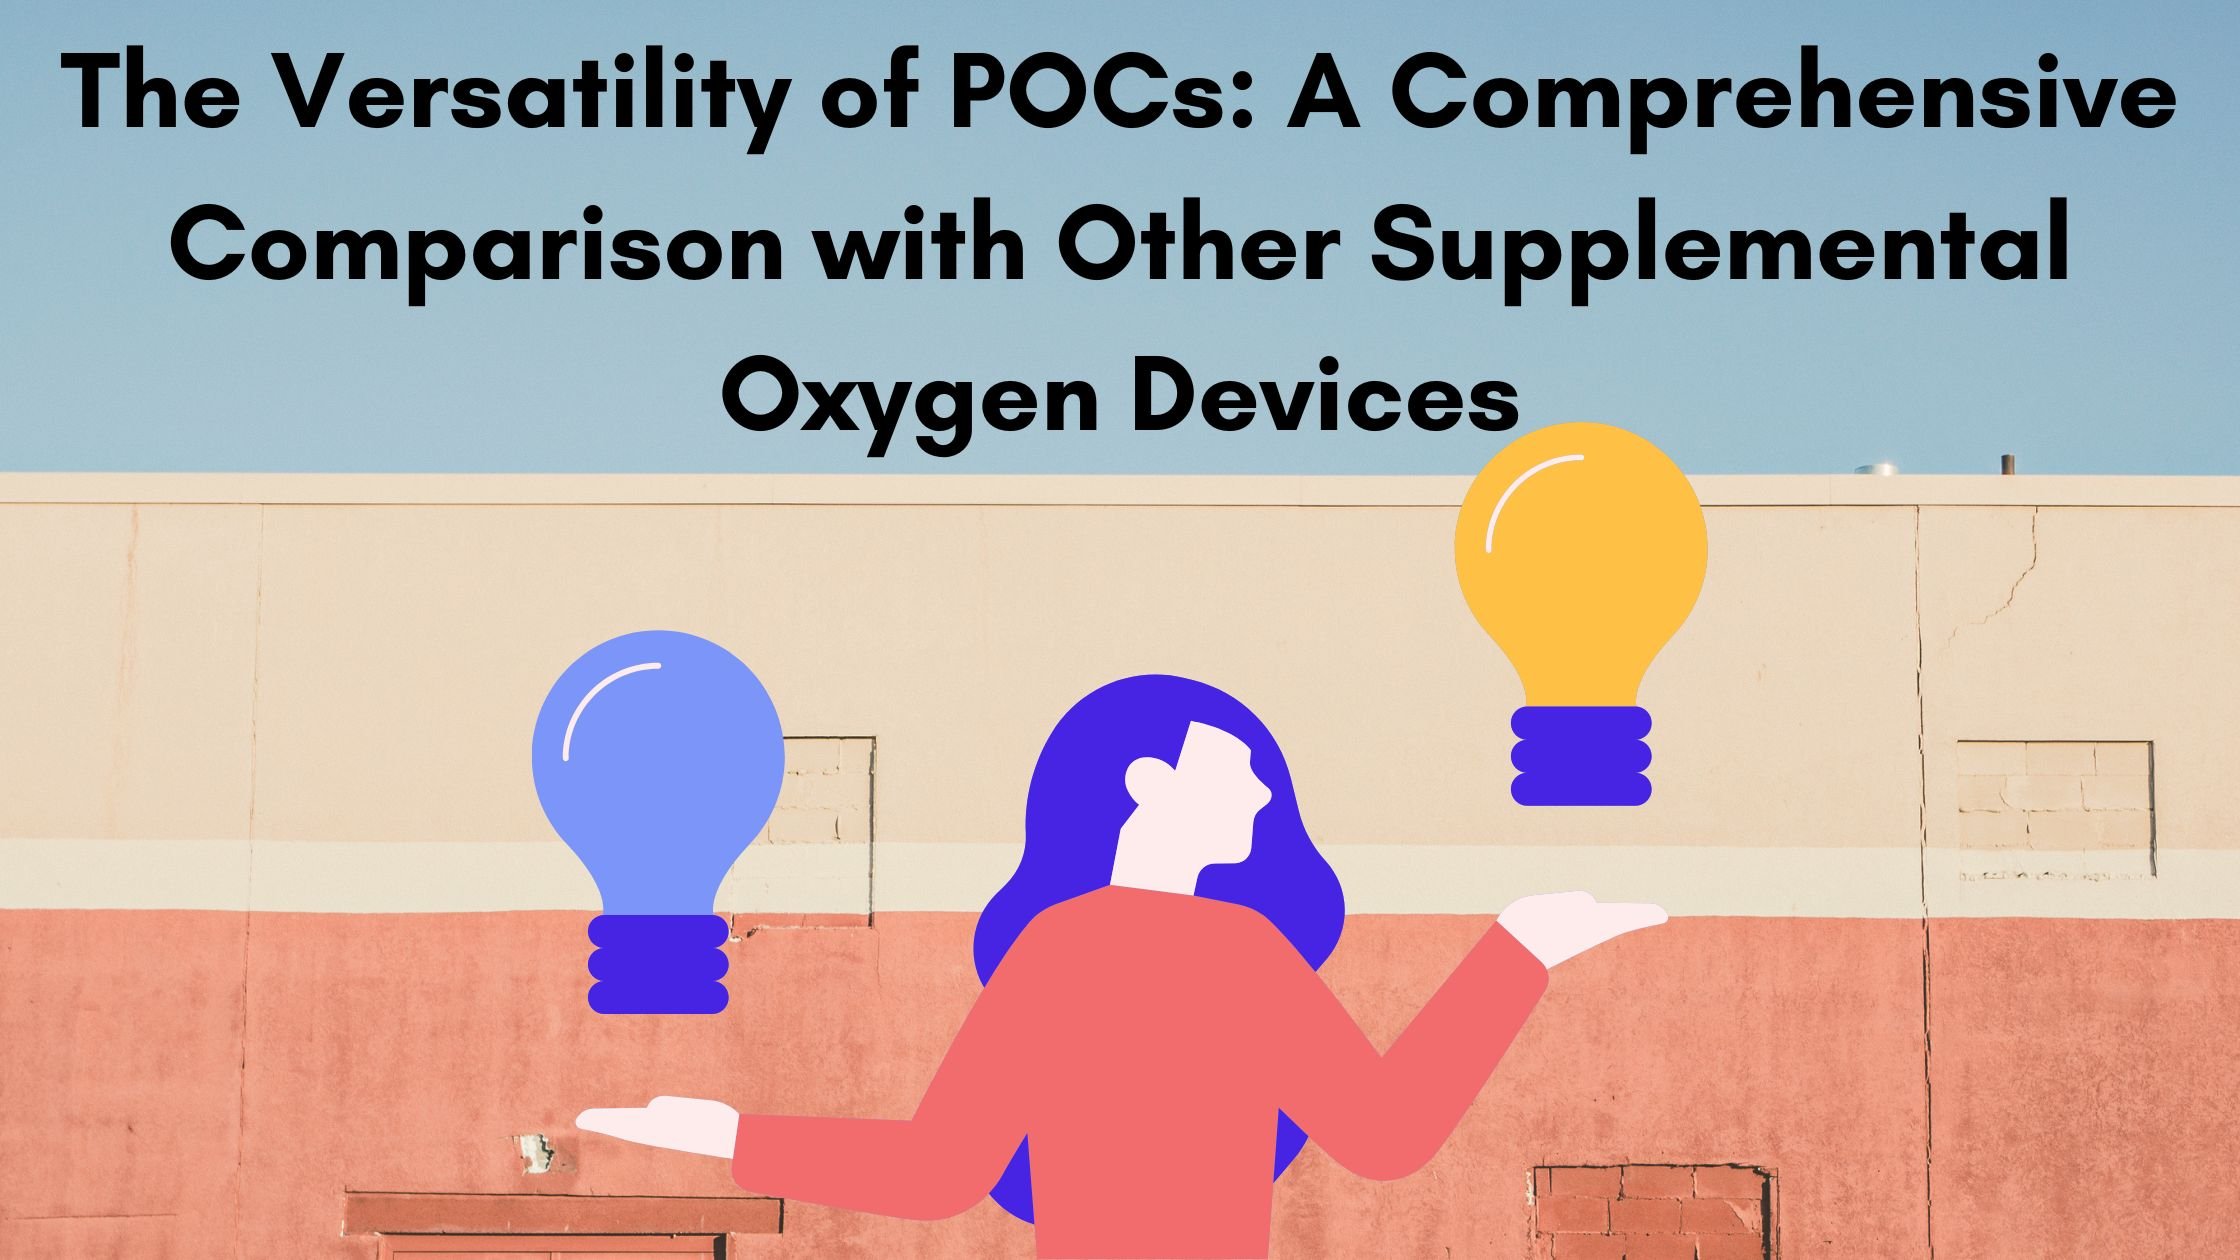 The Versatility of POCs A Comprehensive Comparison with Other Supplemental Oxygen Devices